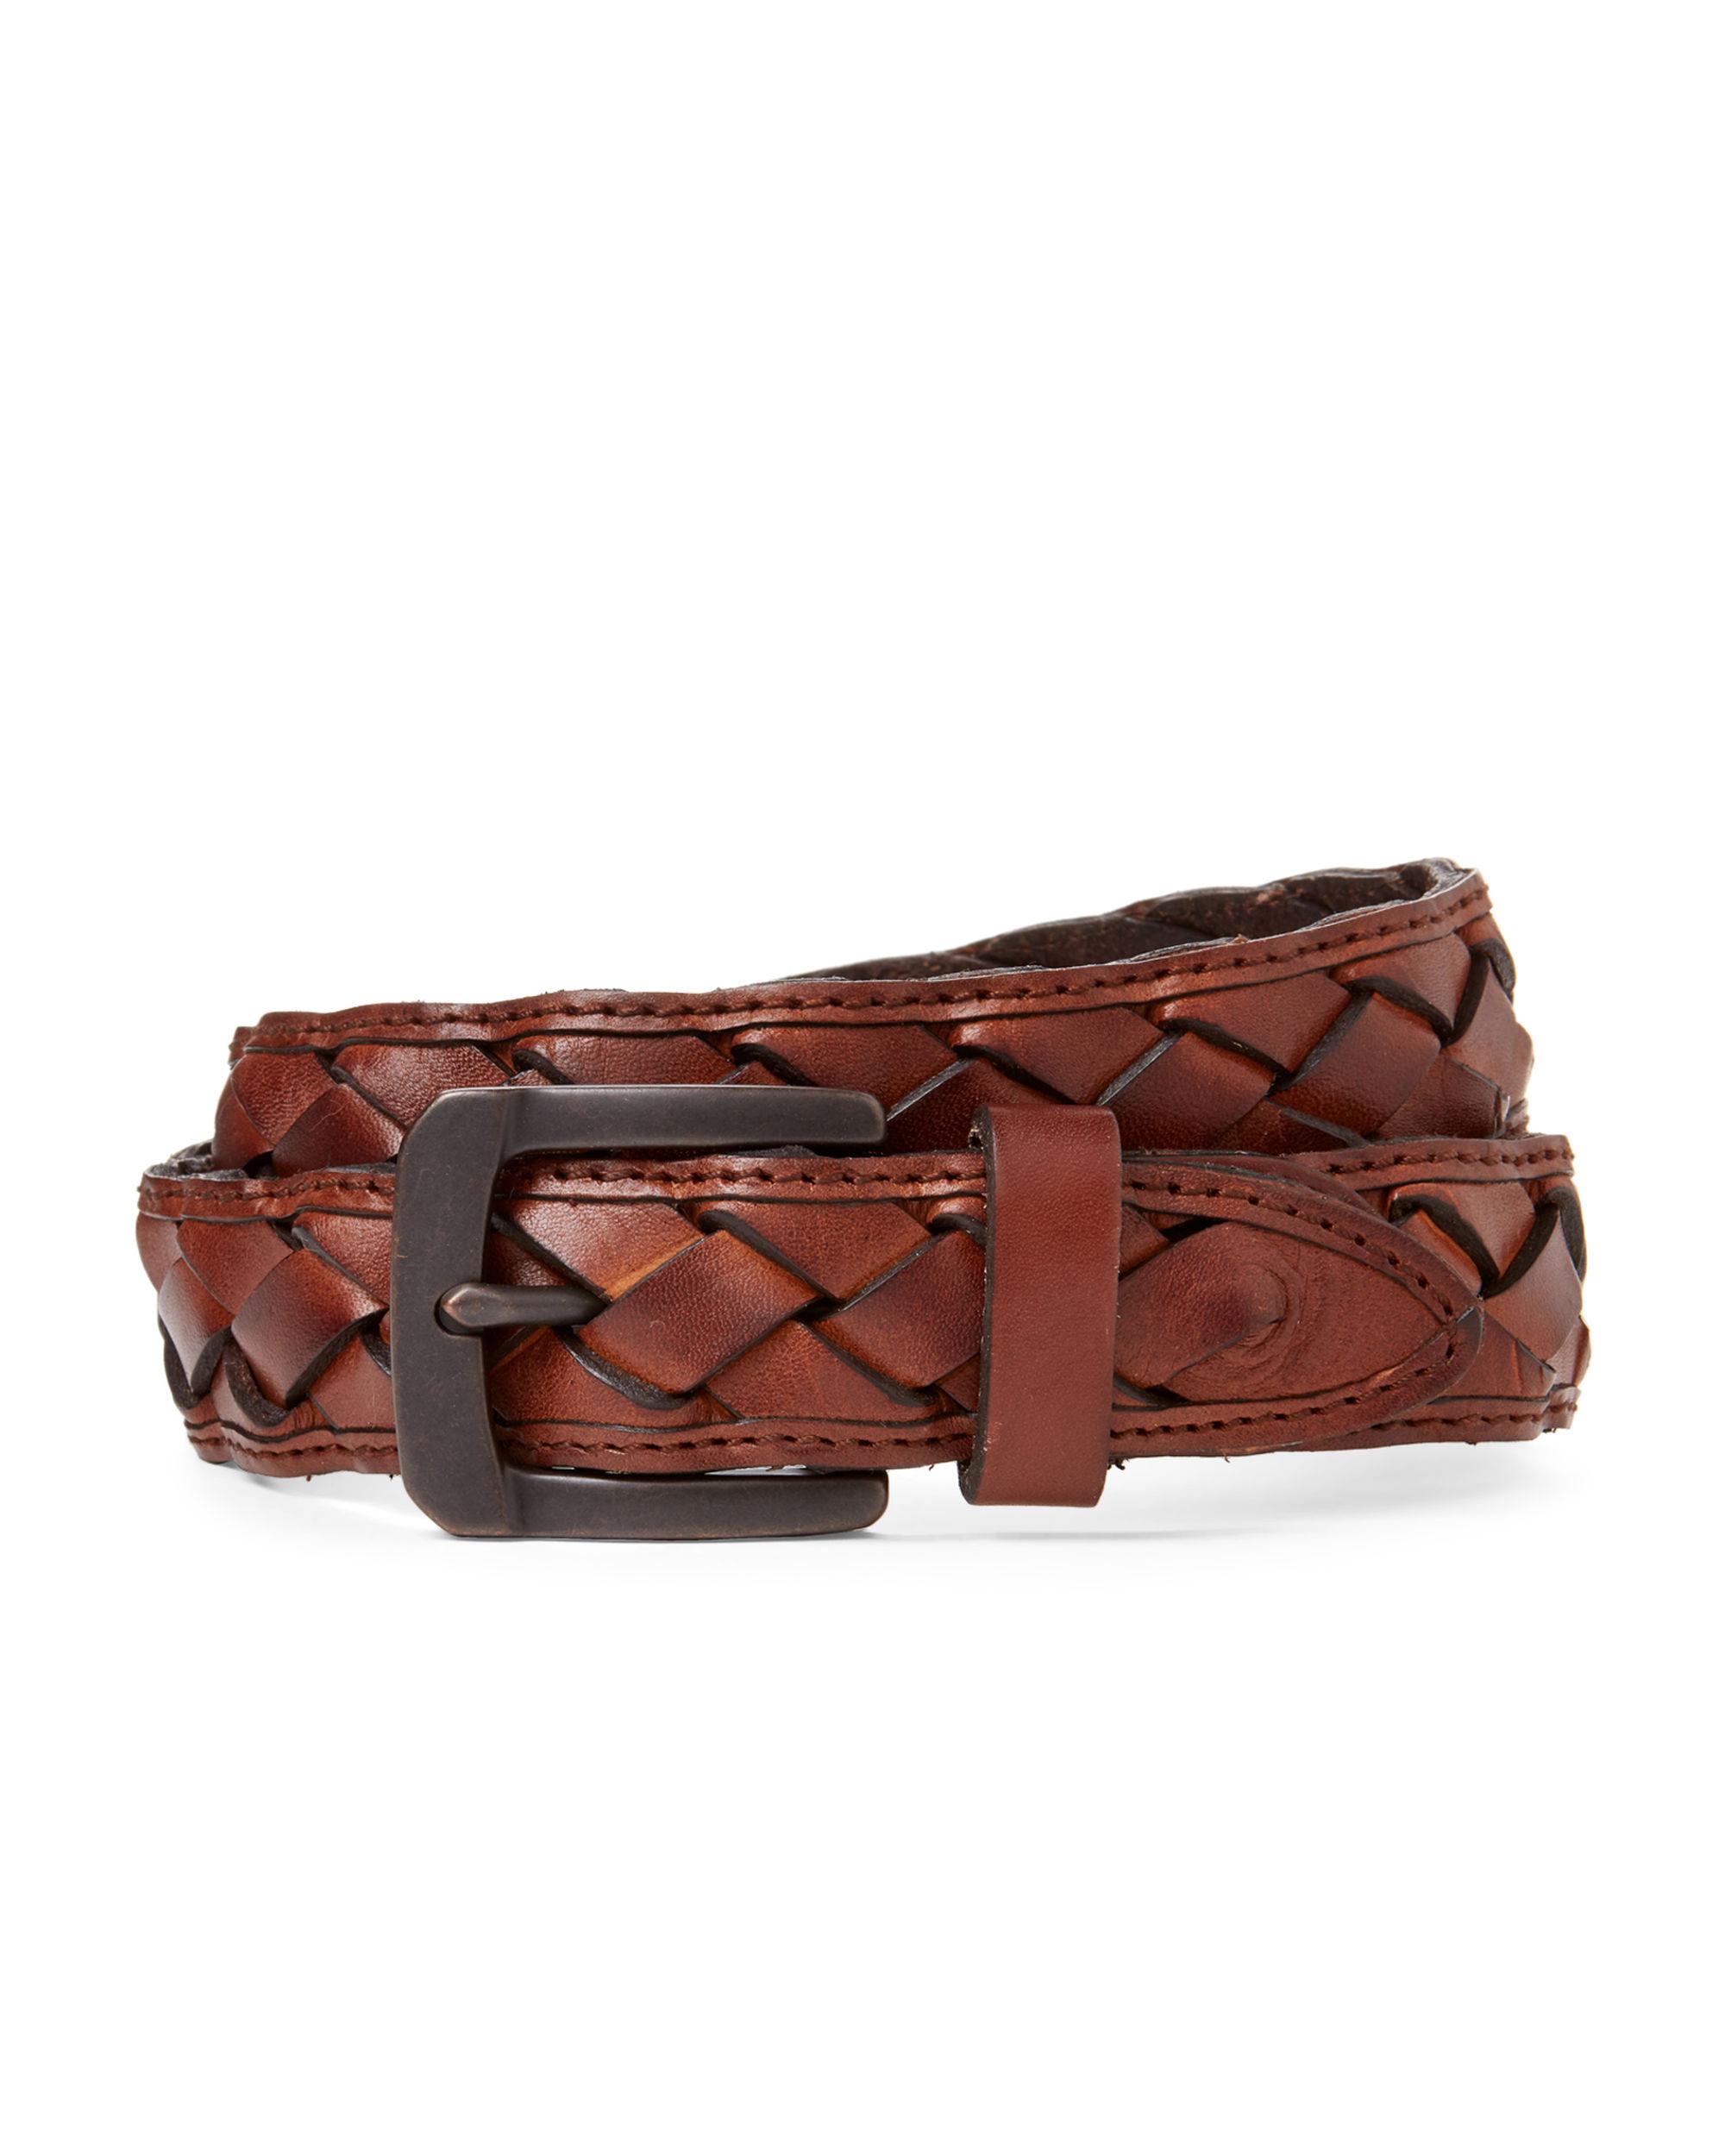 Lyst - Levi's Tan Boho-inspired Braided Leather Belt in Brown for Men